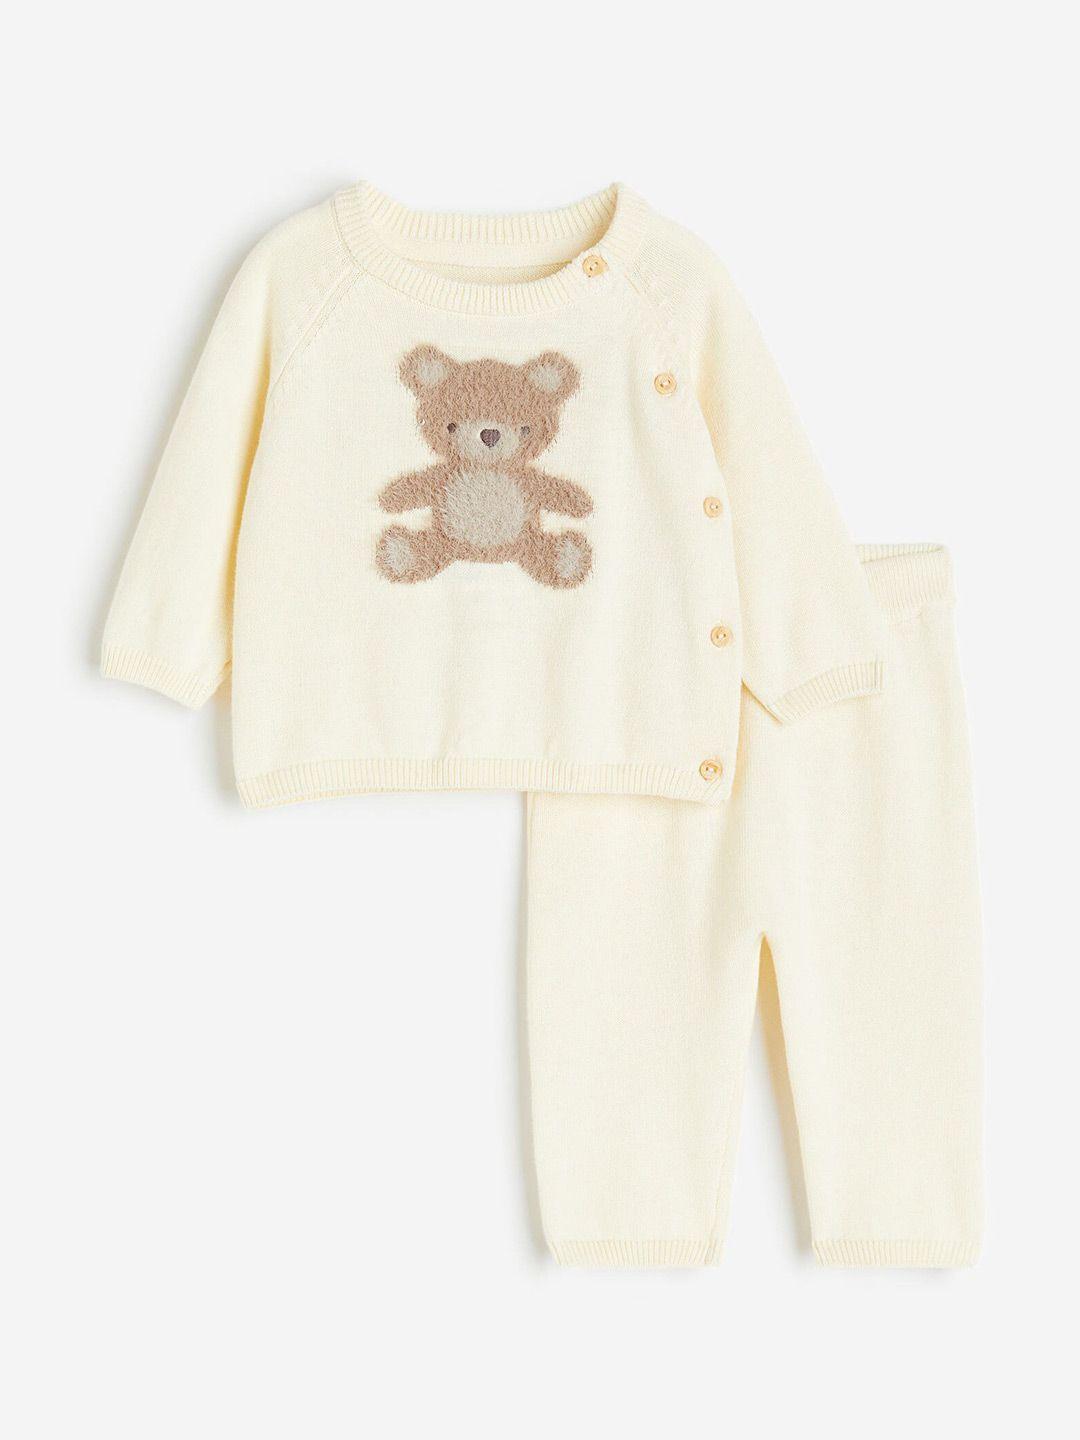 h&m boys 2-piece knitted cotton set